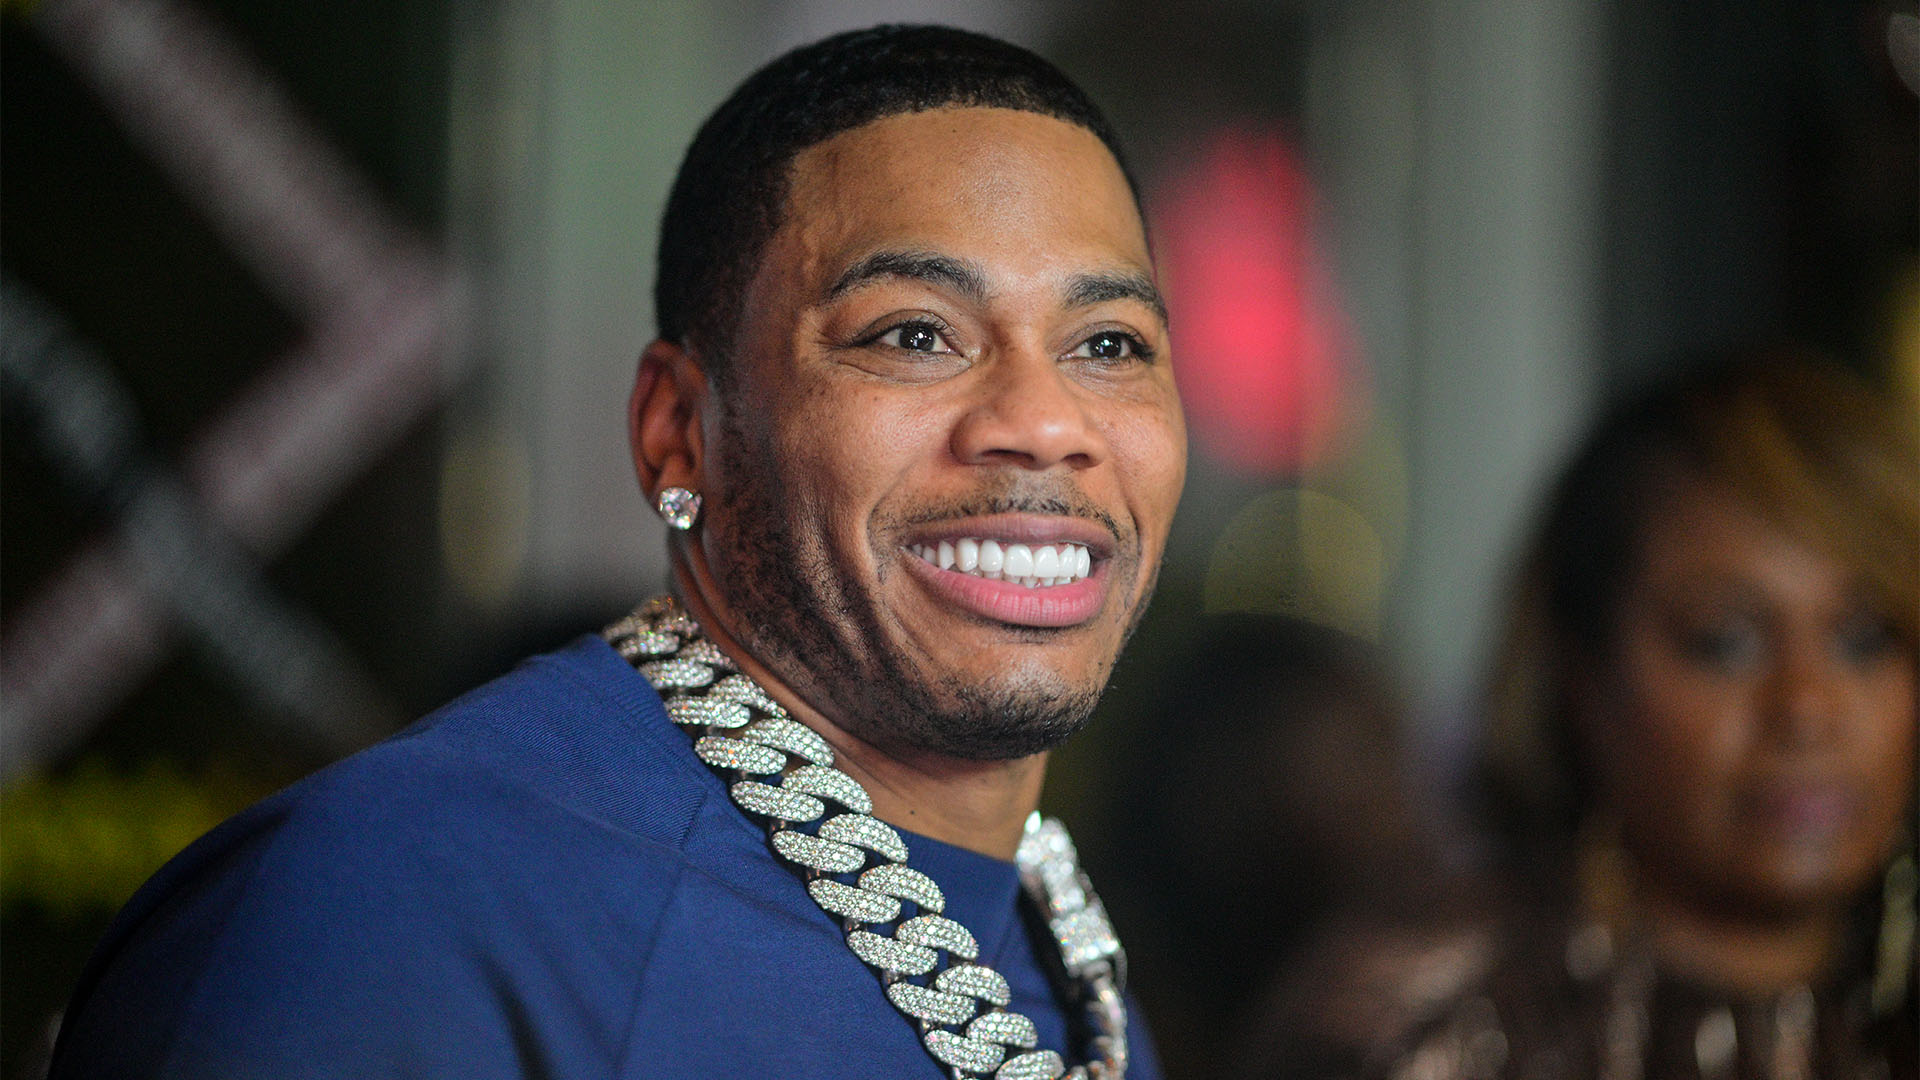 Nelly Defends Selling His Catalog For $50M, Even If Others May Disagree — ‘That’s Your Equity, That’s Your Gold’